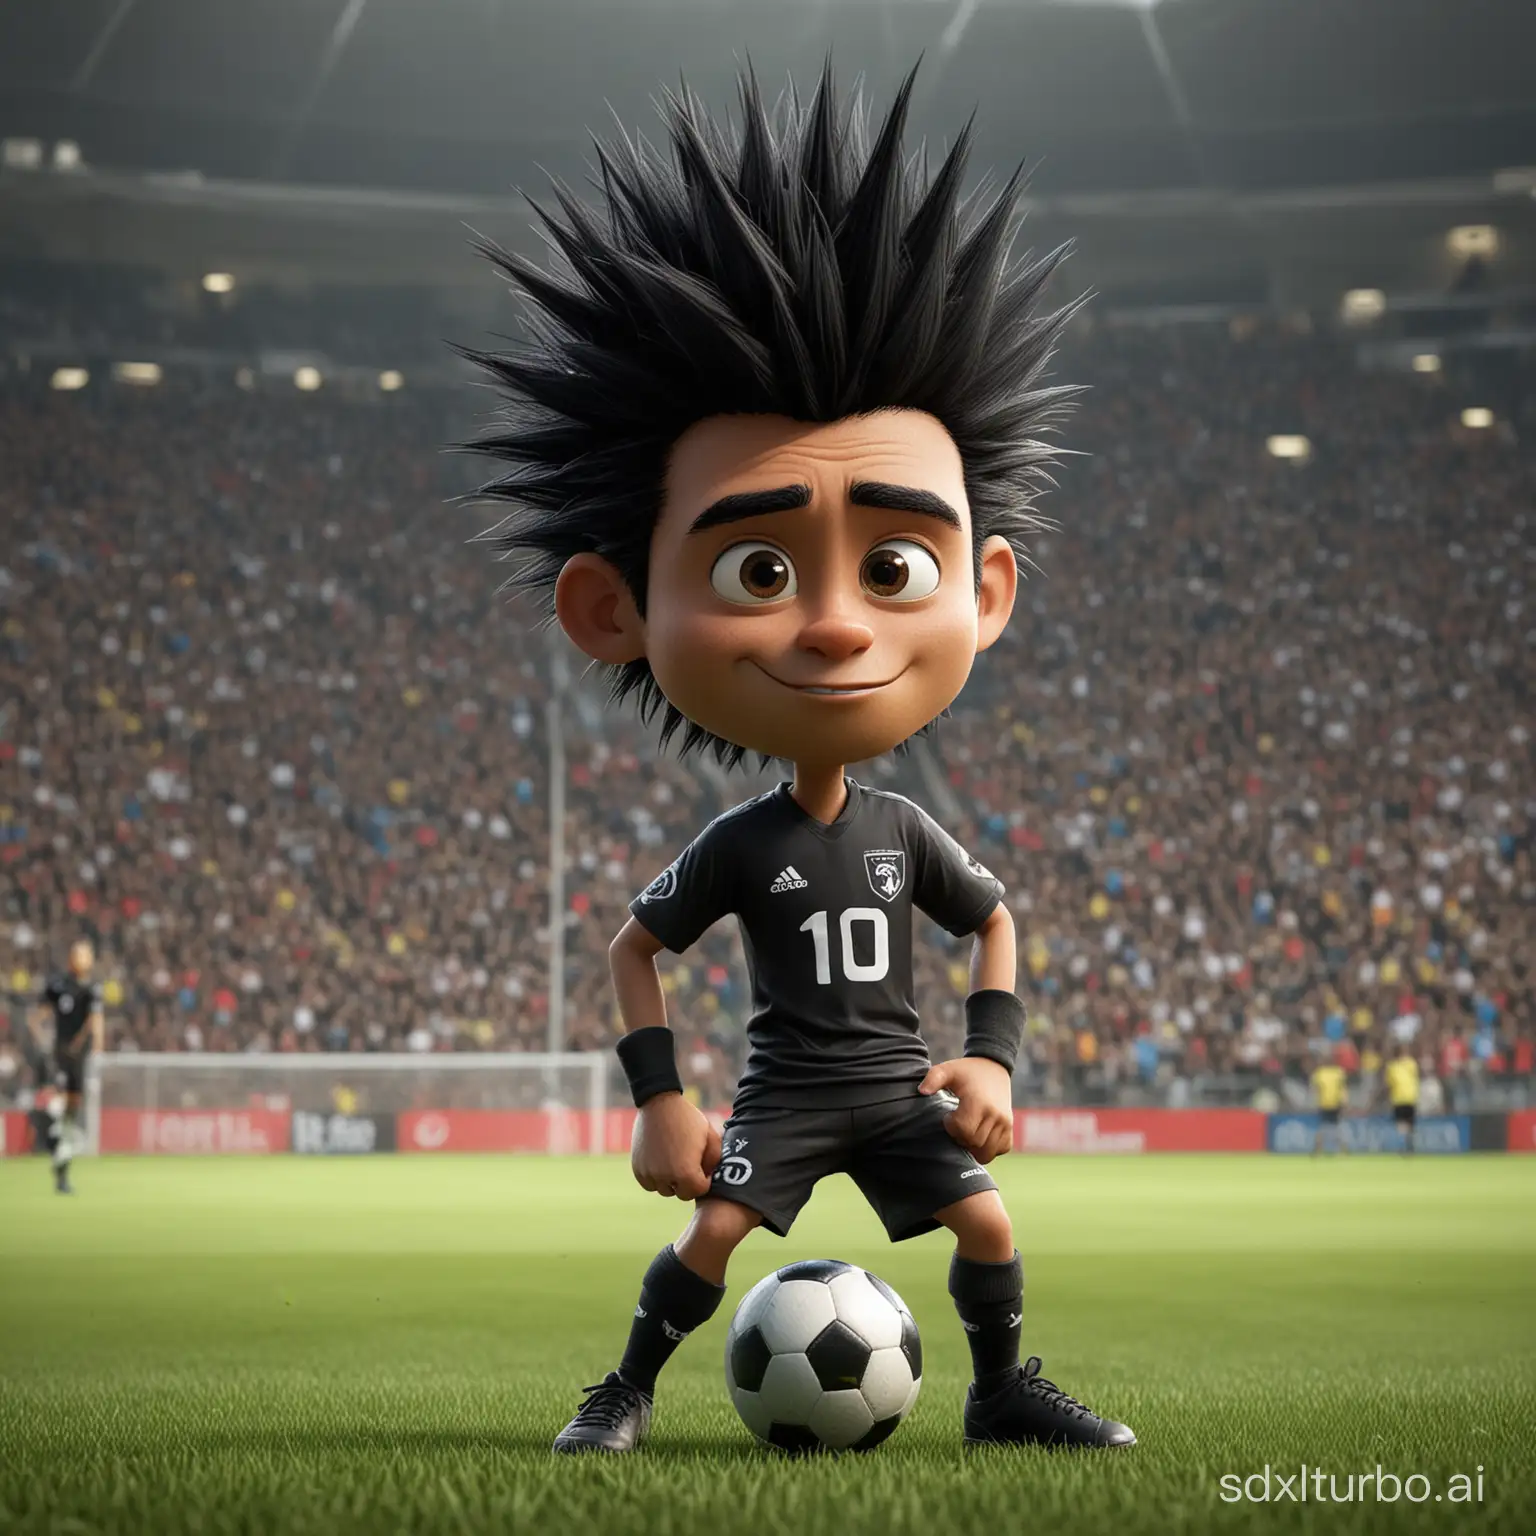 An Indonesian soccer player, playing soccer, with black spiky hair, dressed in black, aged 40, the photo looks like Pixar cartoon style.